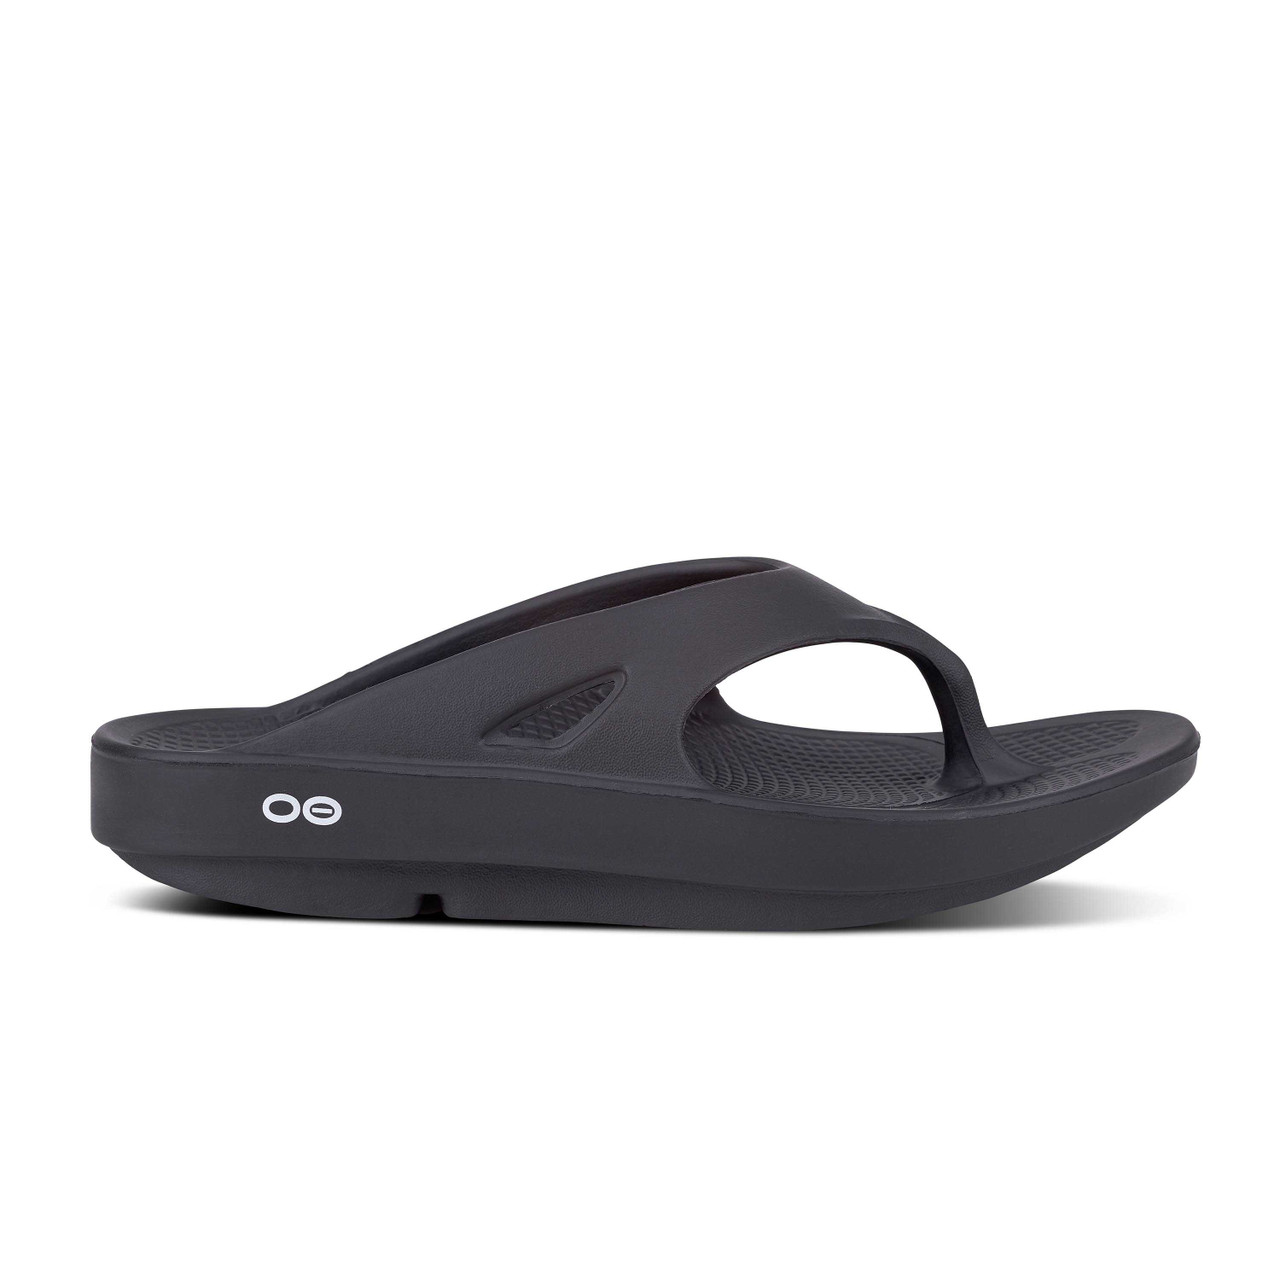 OOFOS Footwear Offers Recovery on the Go